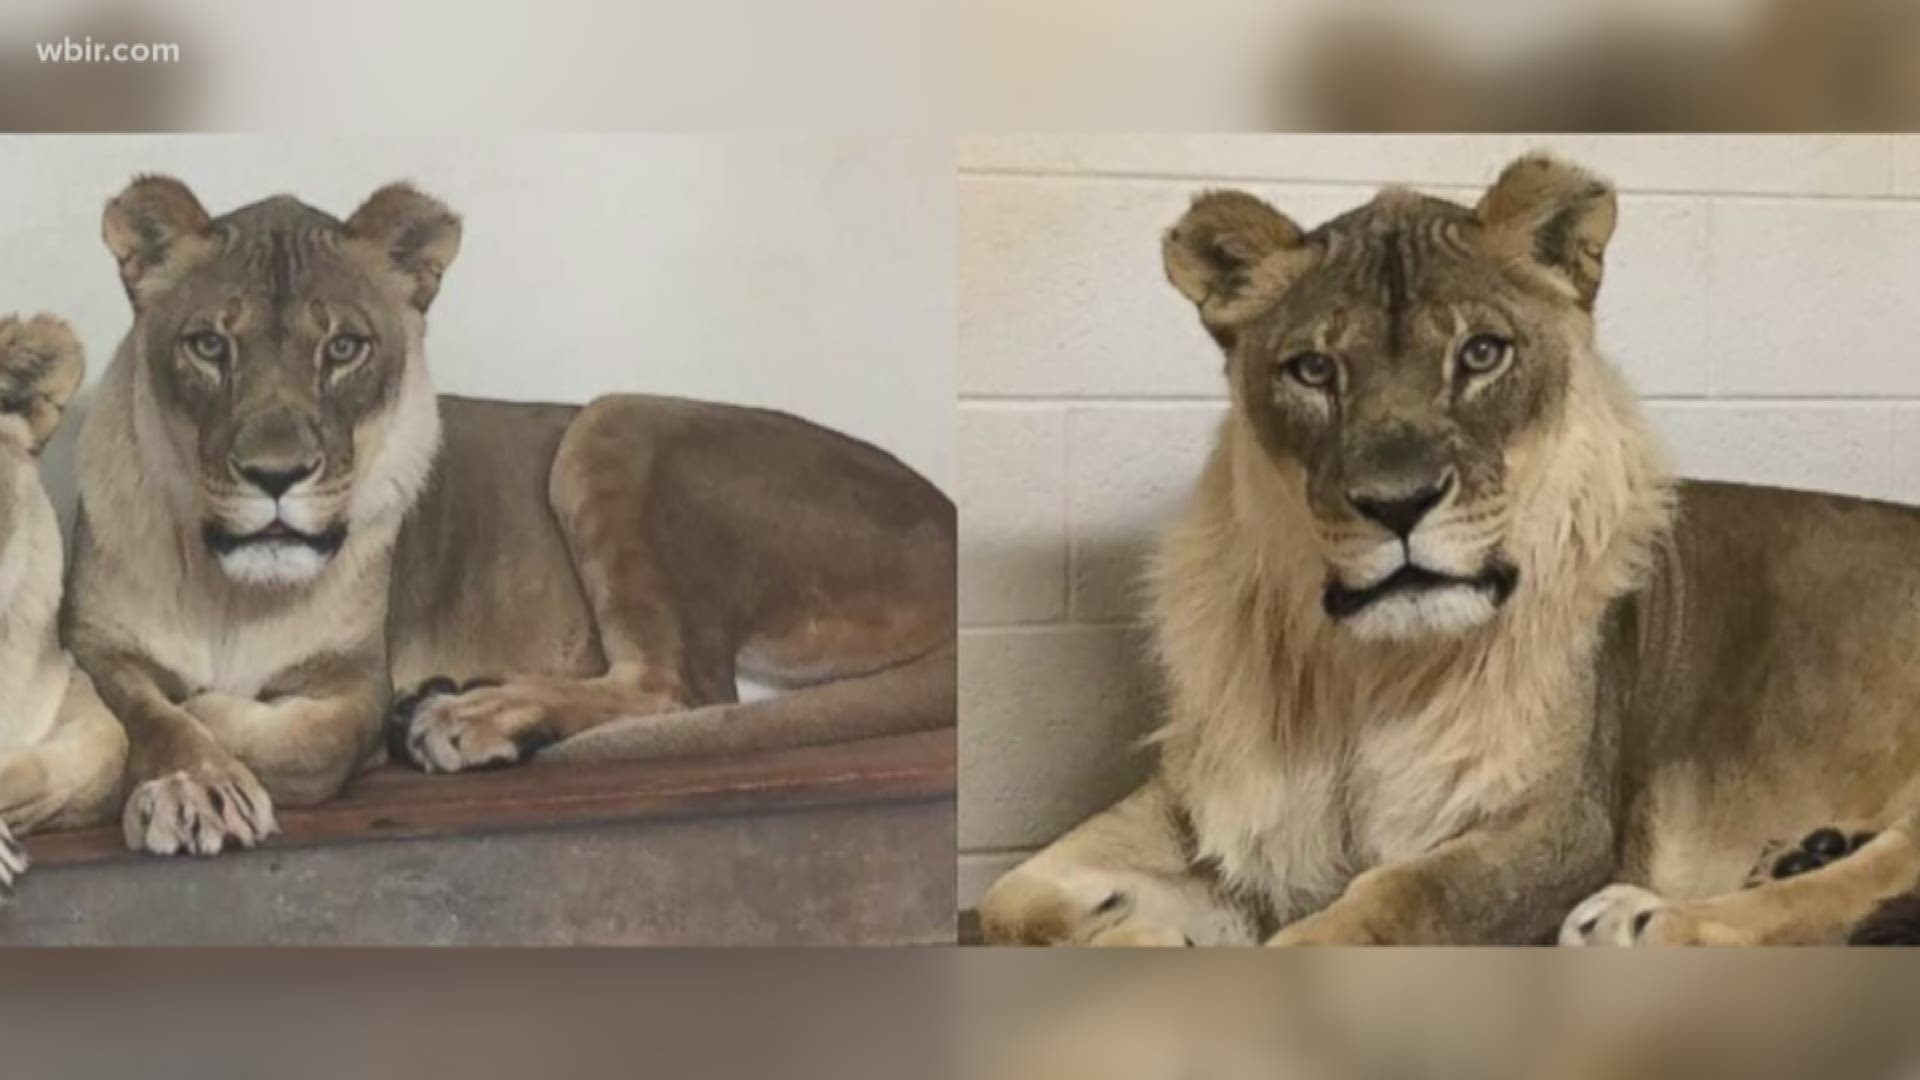 Bridgett, an 18-year-old lion at the Oklahoma City Zoo, baffled scientists when she started growing a mane.